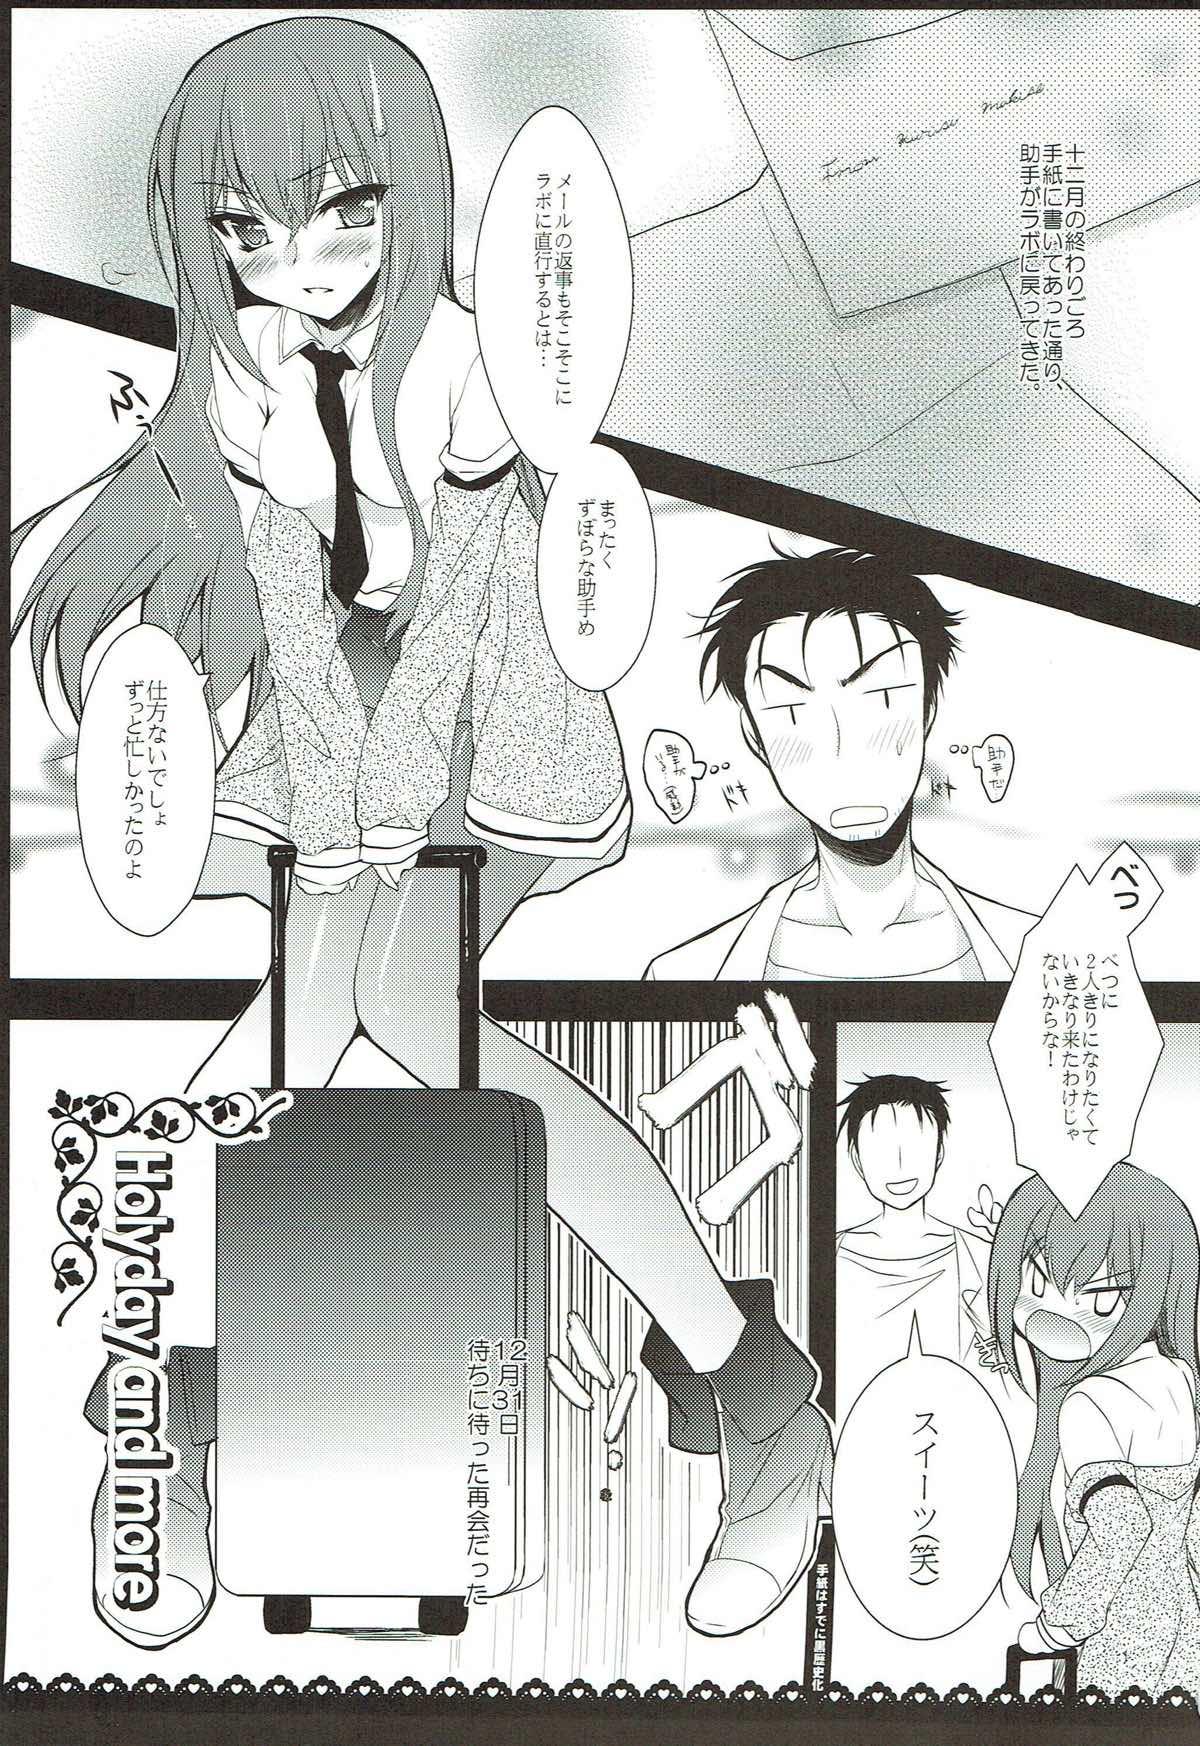 Orgasmo Holyday and more - Steinsgate Putaria - Page 2